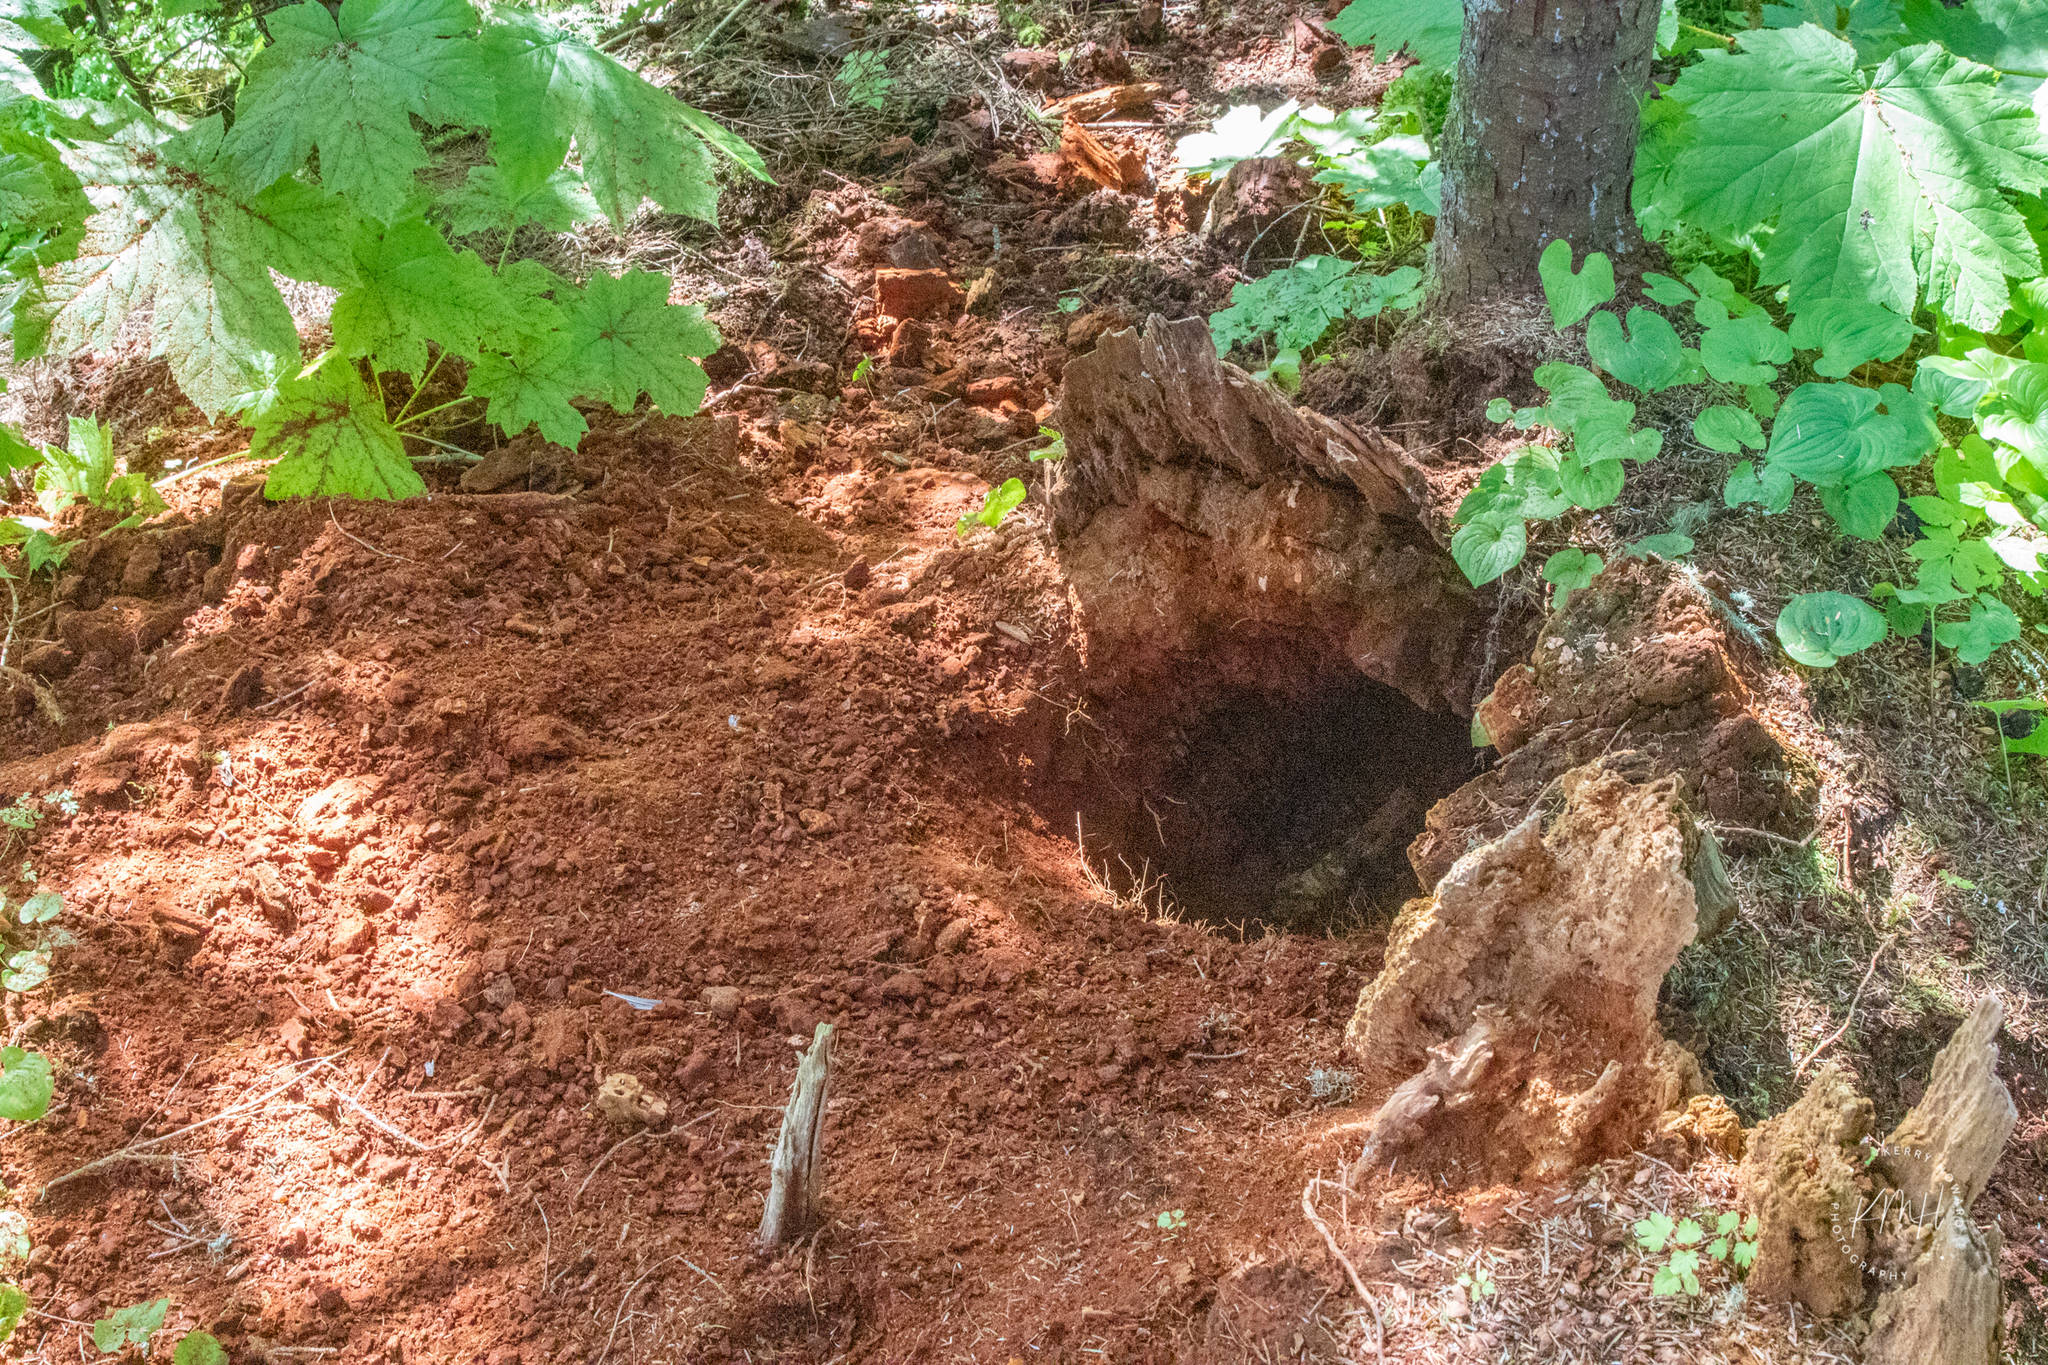 Courtesy Photo / Kerry Howard 
This photo shows a tree stump after a bear has dug out a big root, making a deep hole